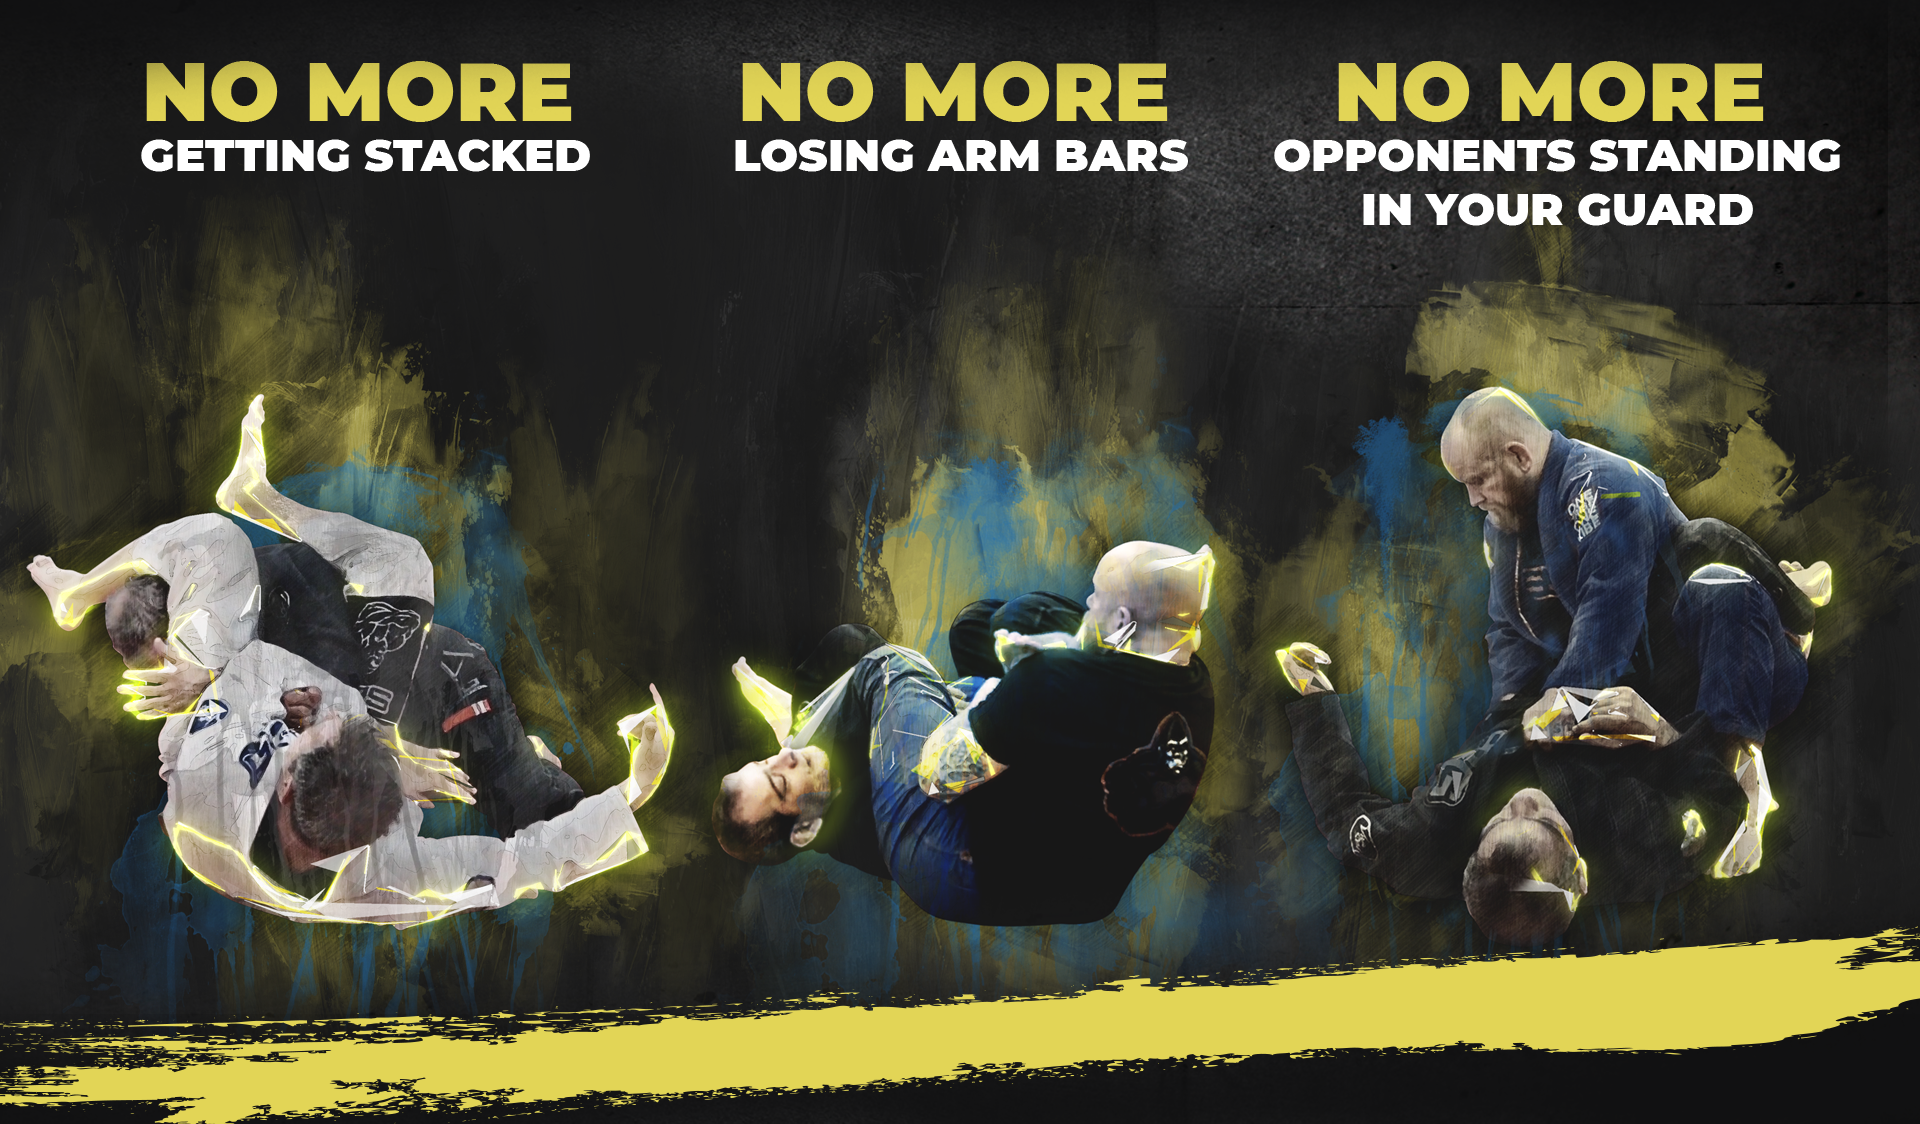 No More Losing Arm Bars – No more opponents standing in your guard. 